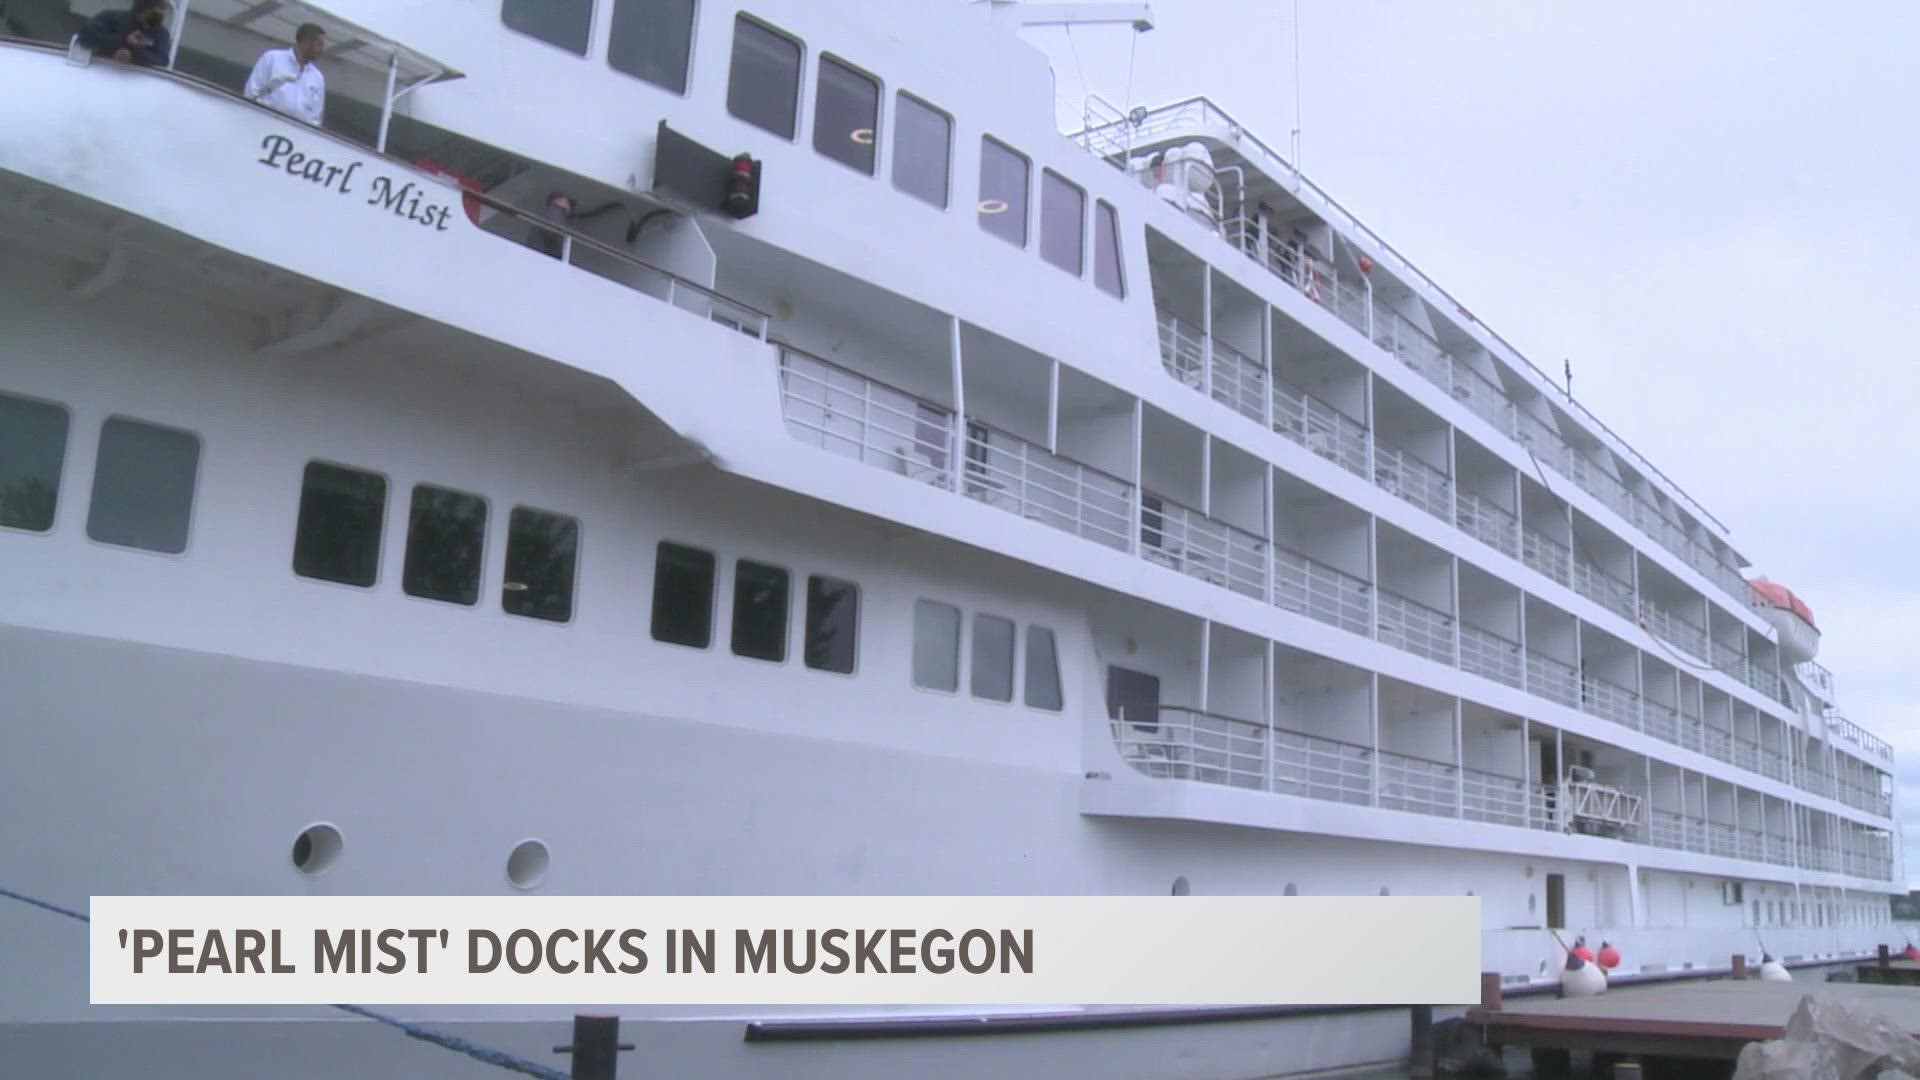 The 210-passenger vessel anchored in Muskegon Lake around 9:00 Tuesday morning.